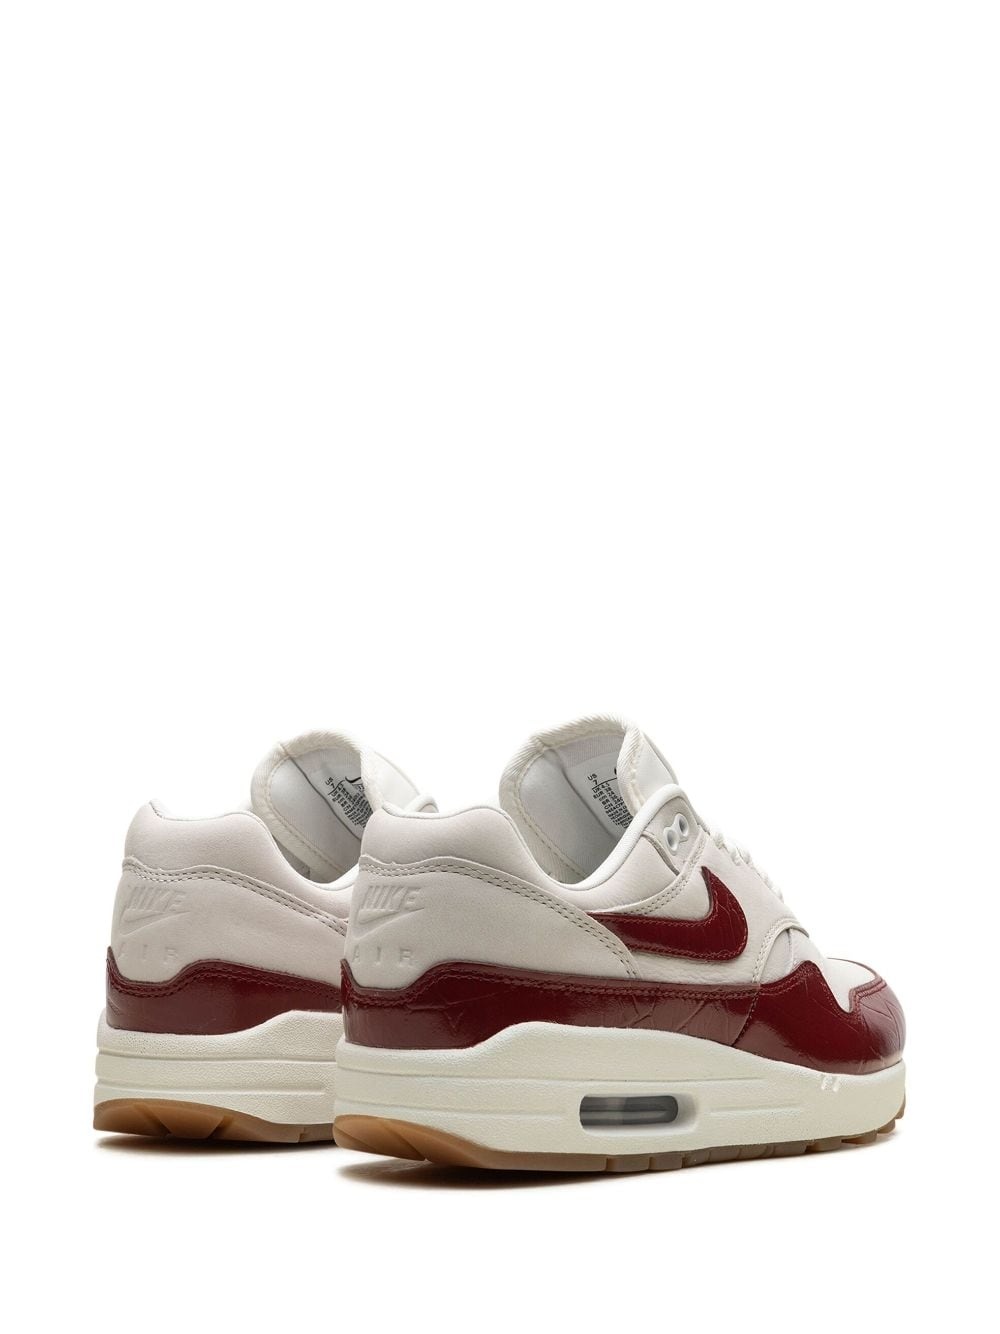 Air Max 1 LX "Team Red" sneakers - 3